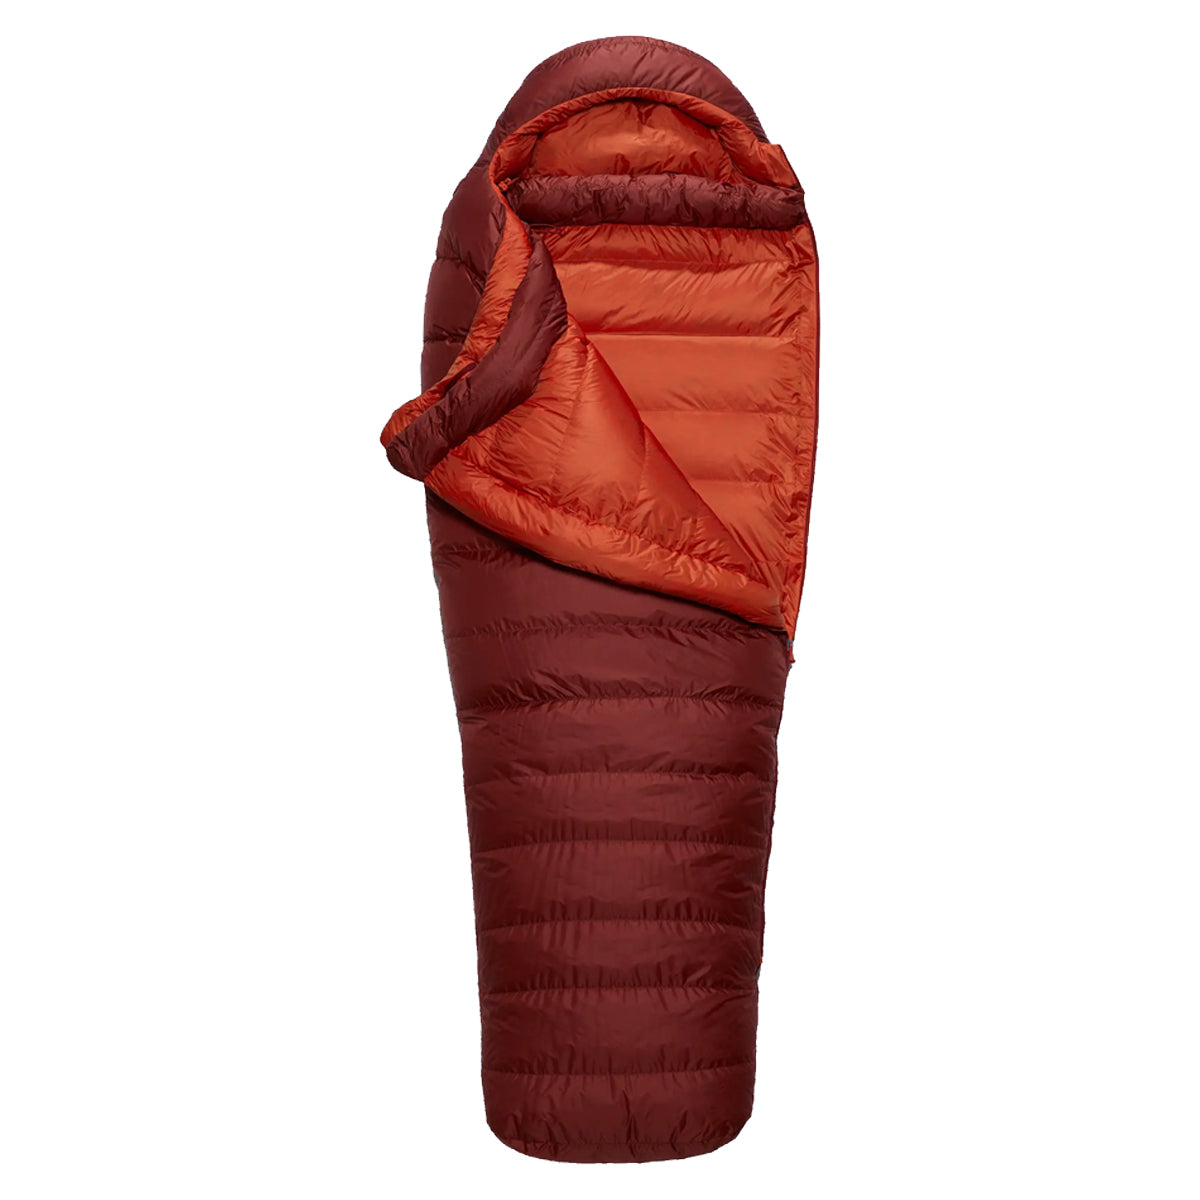 Rab Ascent 900 Down Sleeping Bag in  by GOHUNT | Rab - GOHUNT Shop